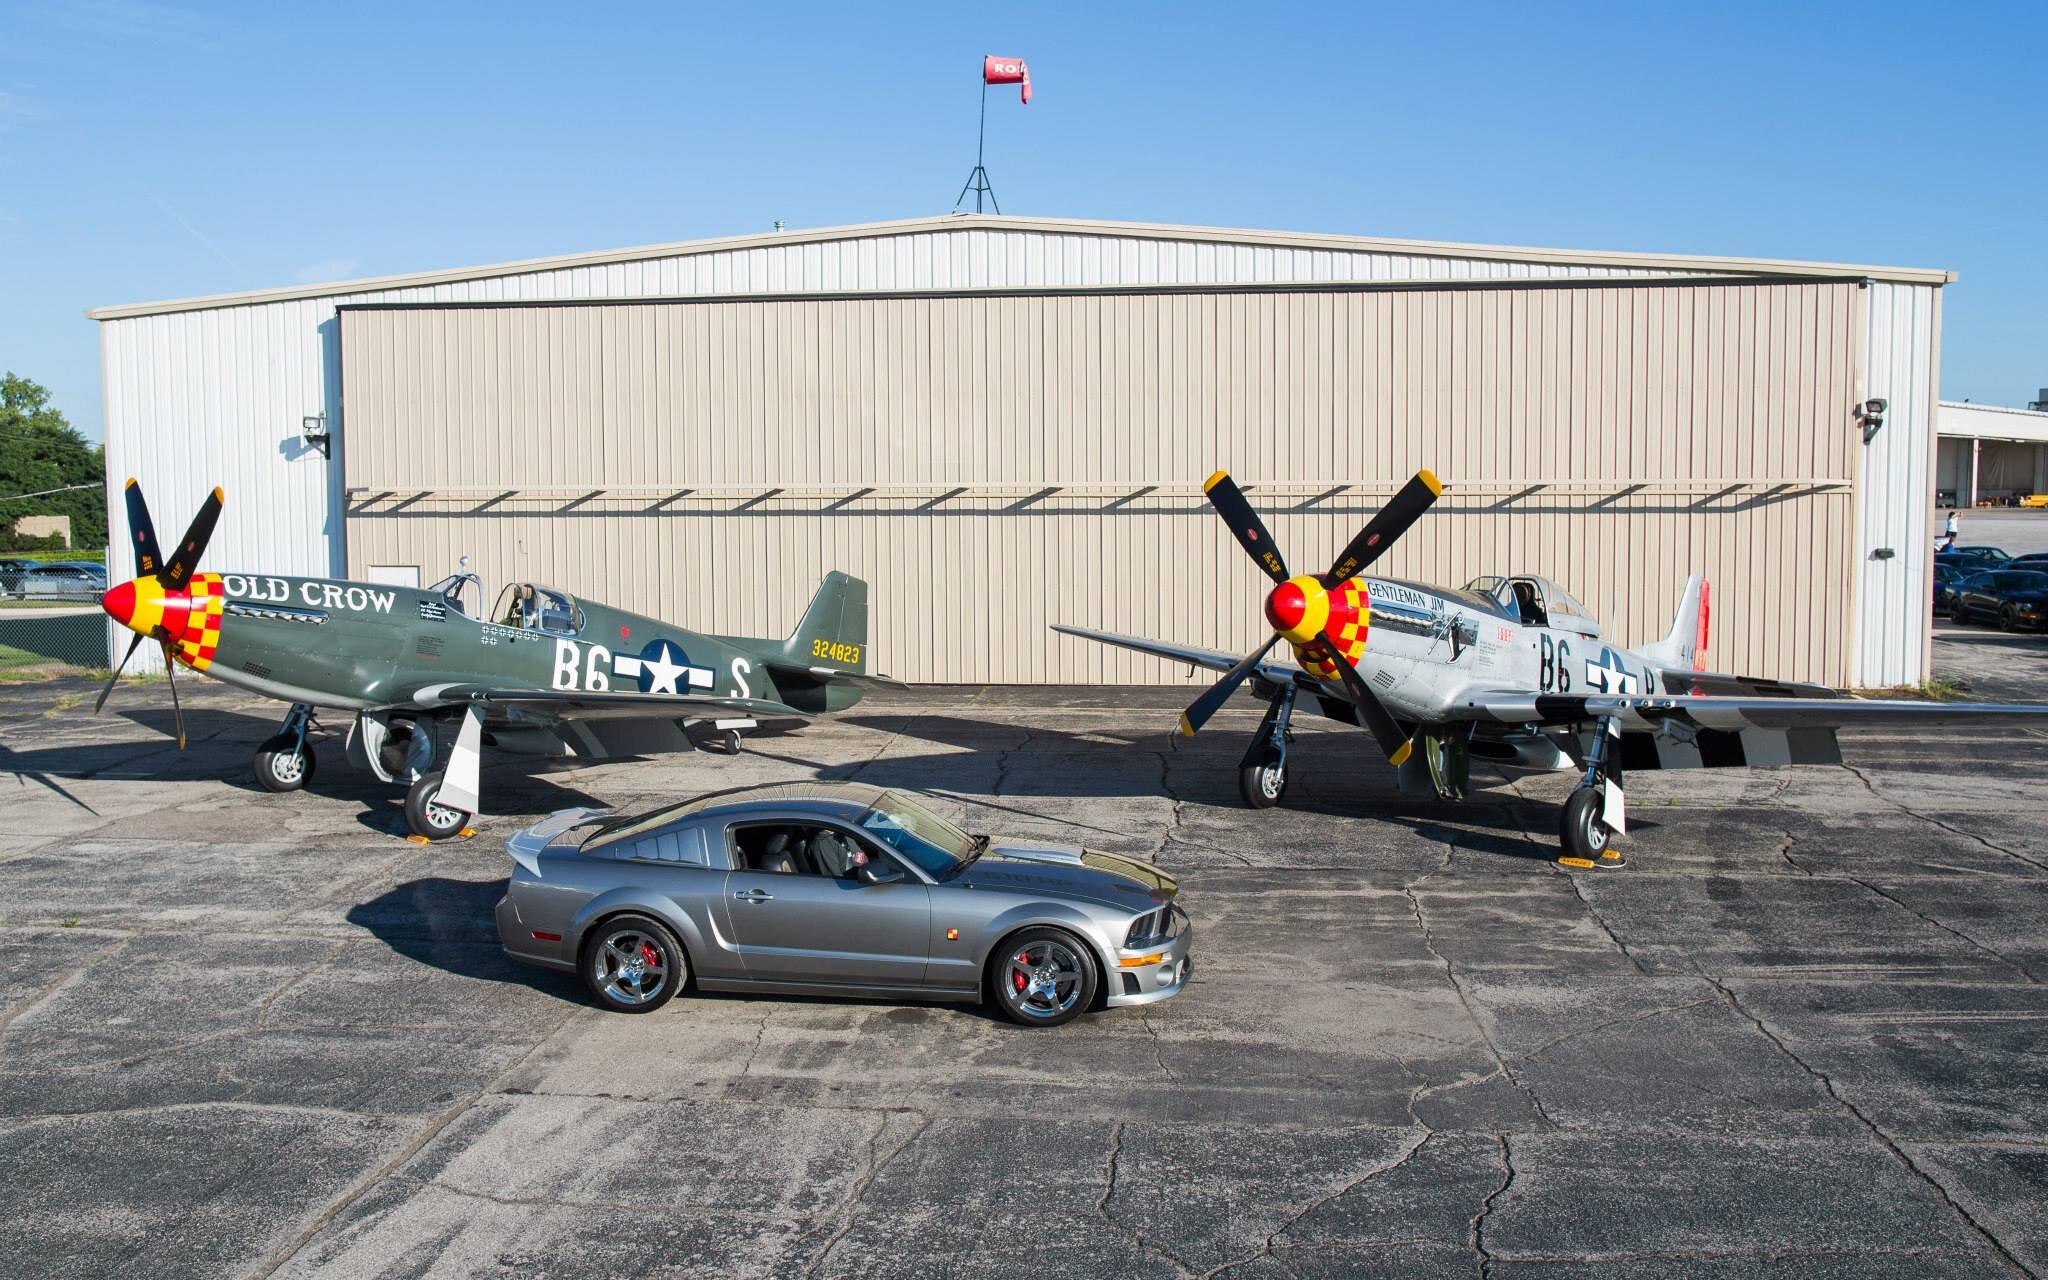 Roush P-51A Mustang owner & enthusiast, politically astute and Sports Fan (I follow the Chicago Bears, Chicago Cubs and Iowa Hawkeye Foot Ball).